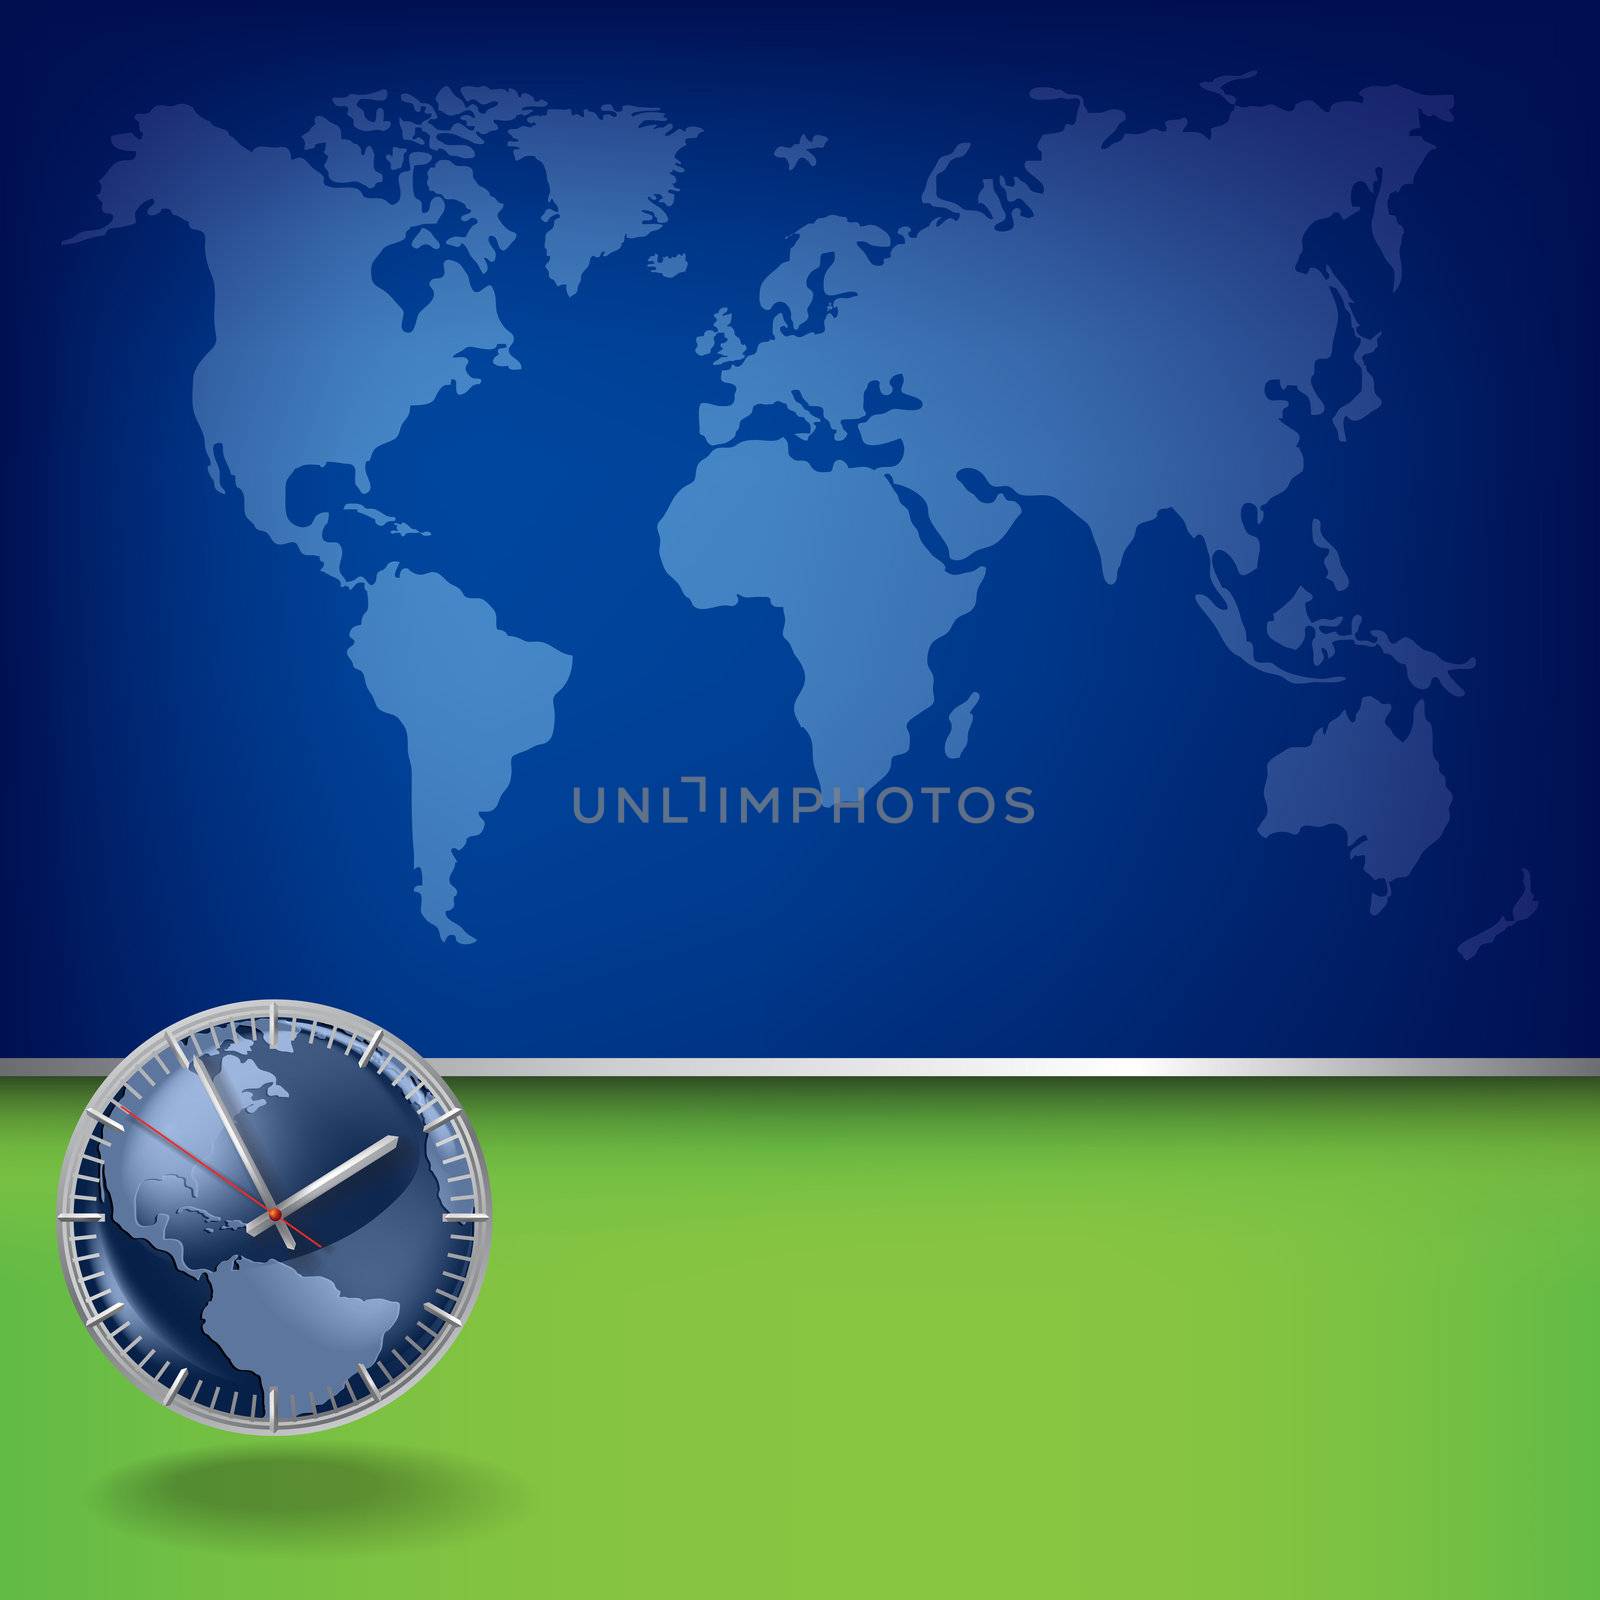 Abstract business background with blue map and clock